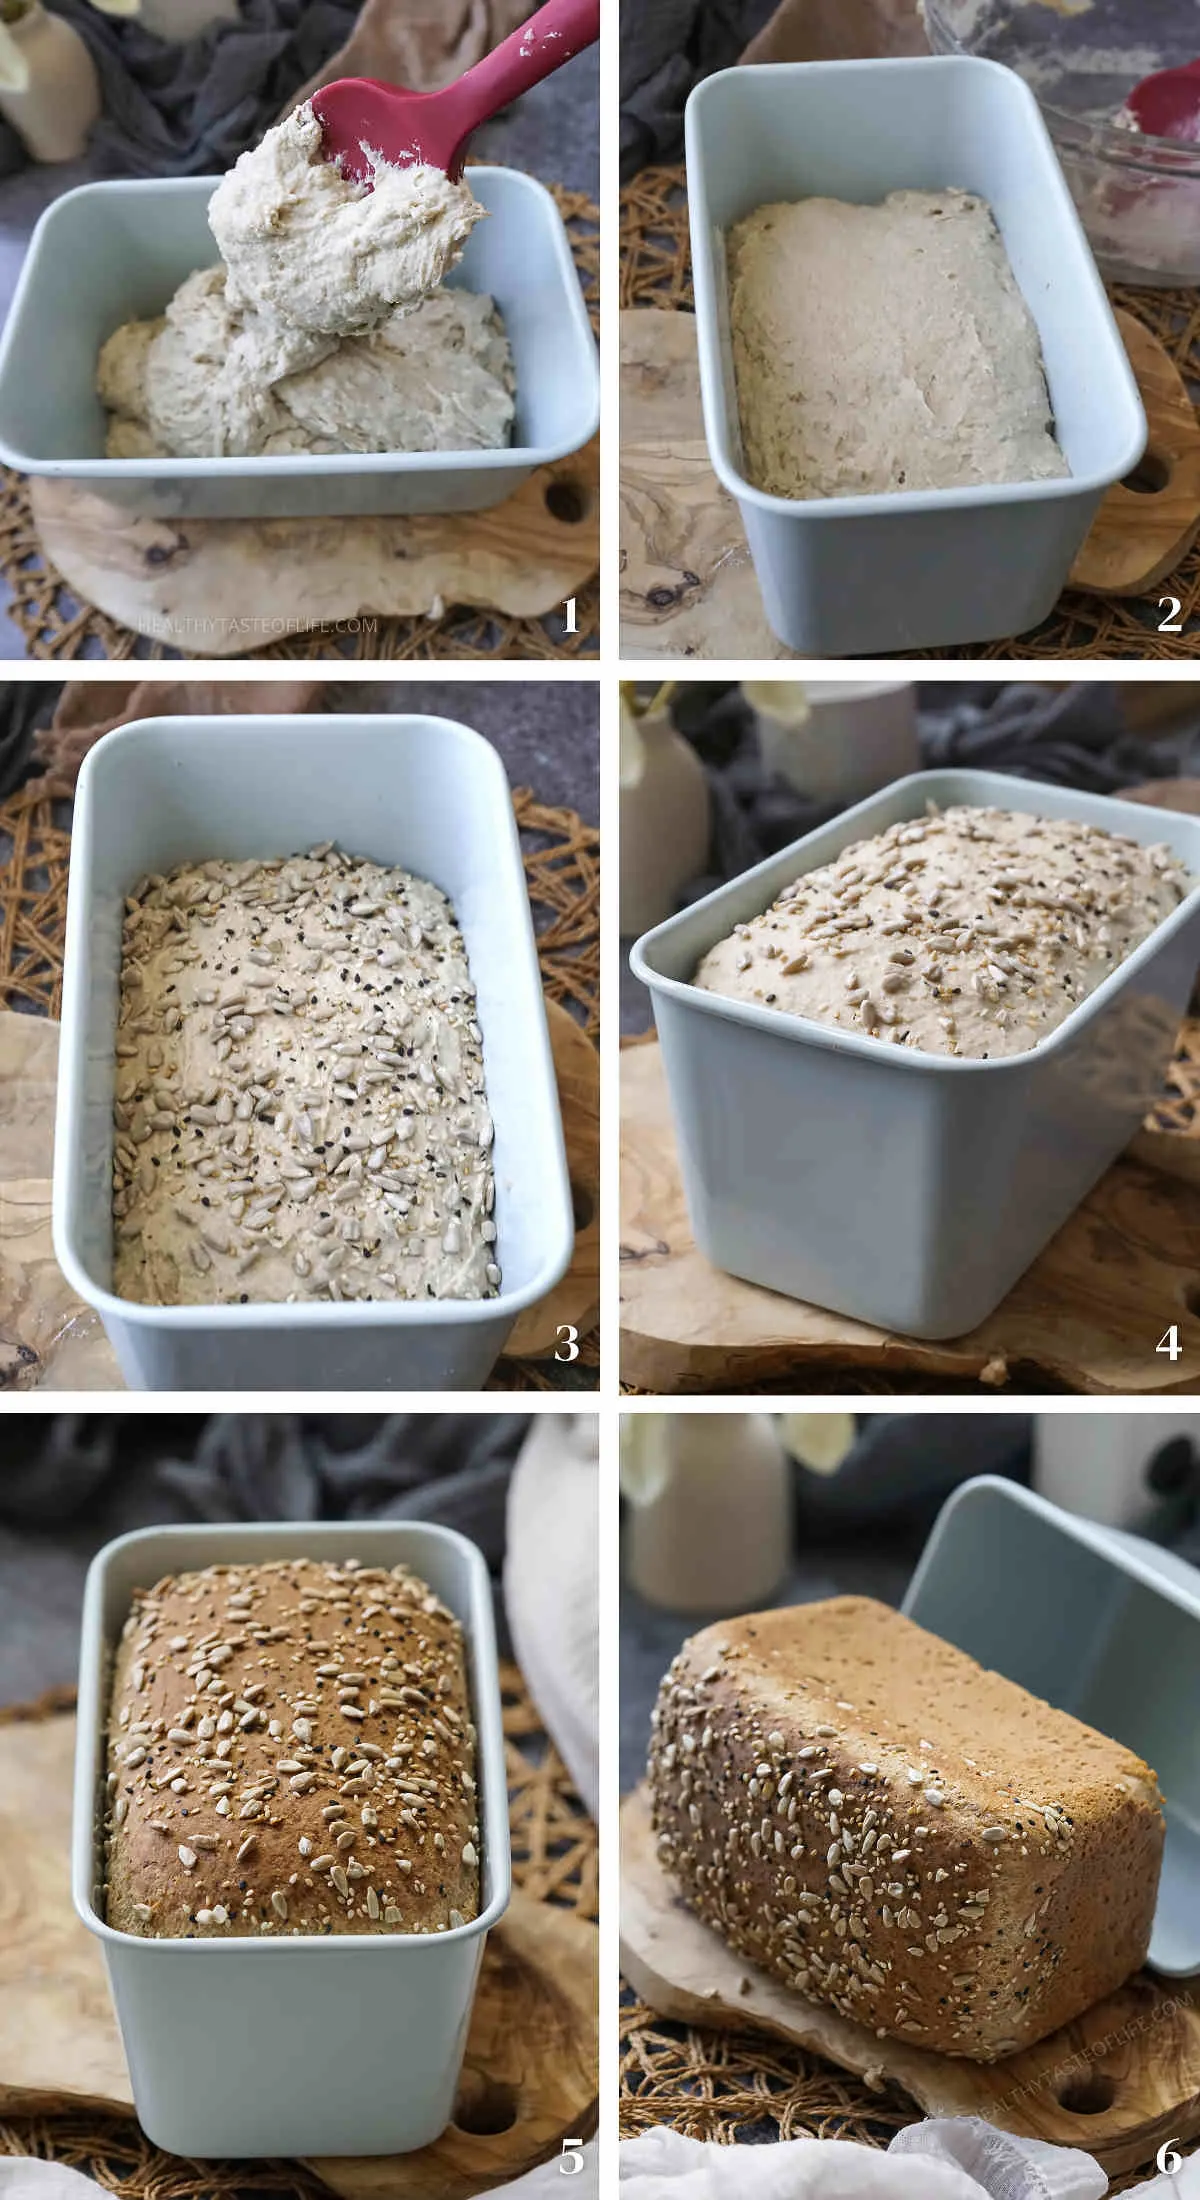 Process shots showing how to work with the wet dough, how to transfer in the baking pan and bake the gluten free buckwheat flour bread.